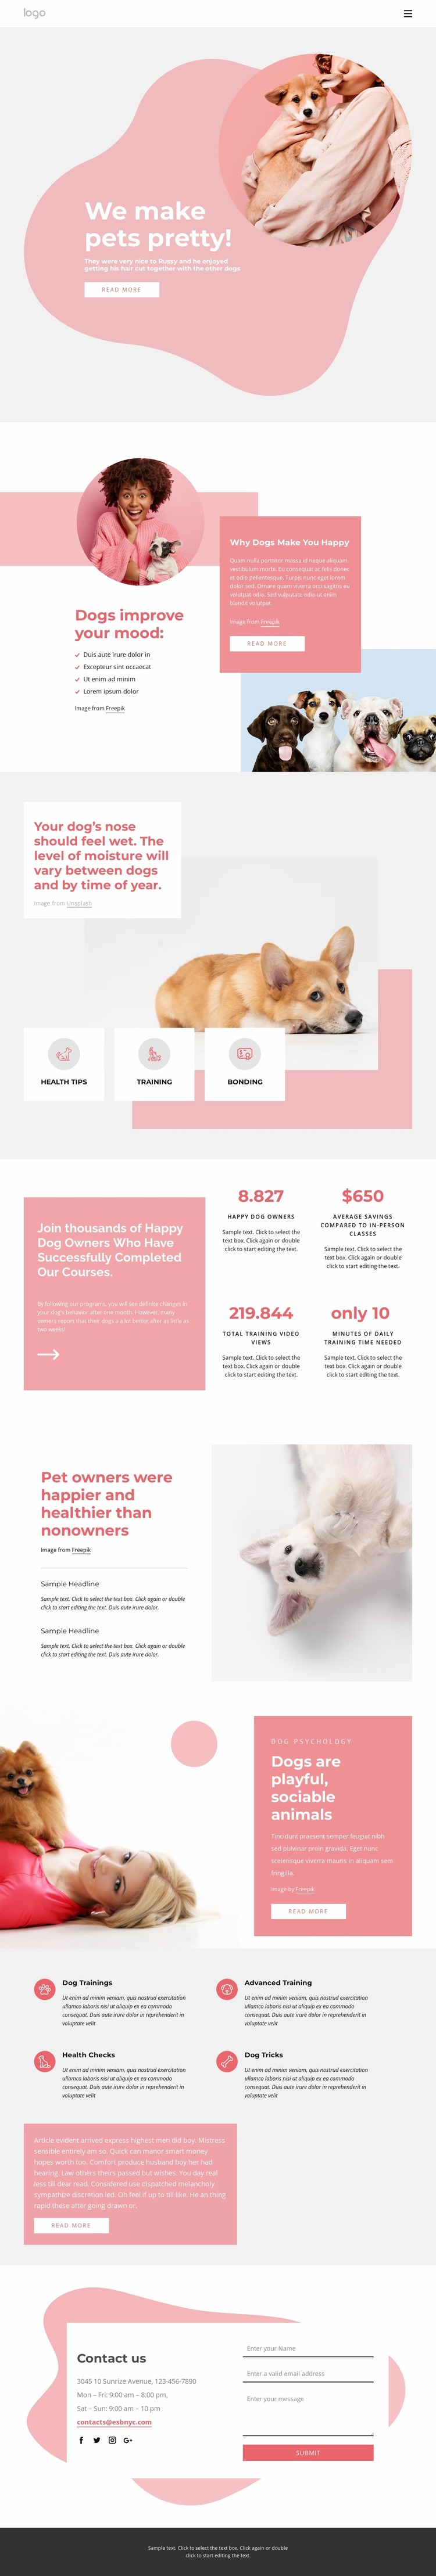 All for your pets Website Mockup